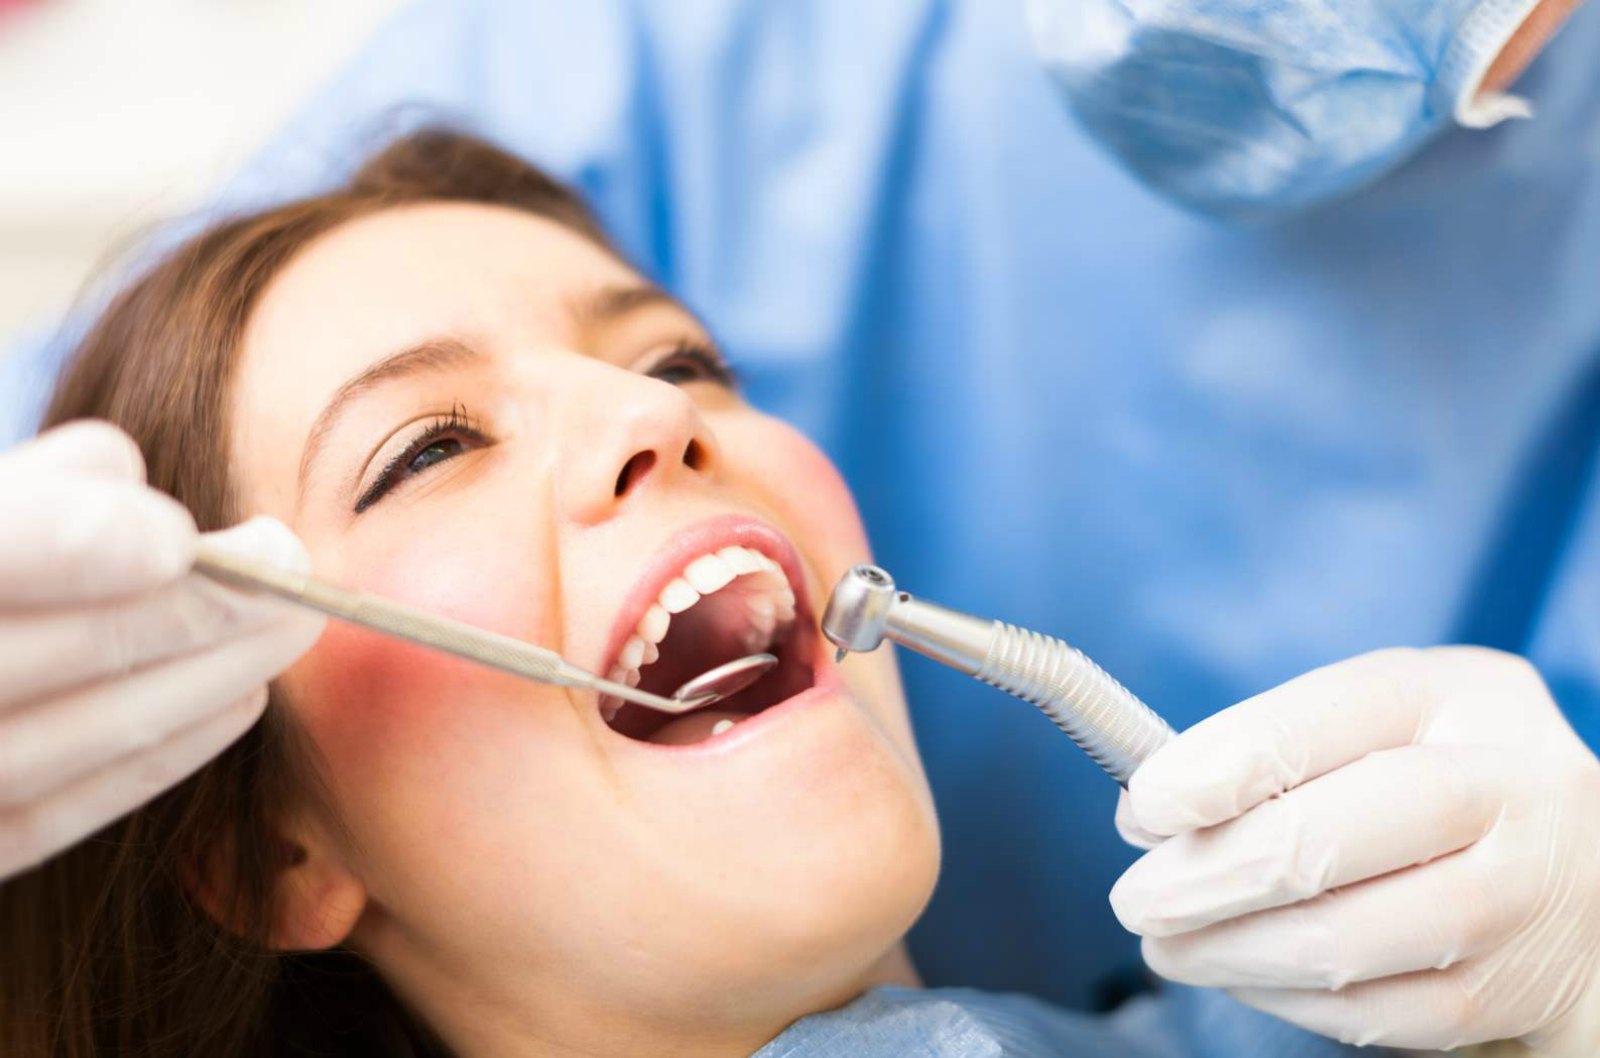 Dental Carrier Device Makes Advancements In Oral Health